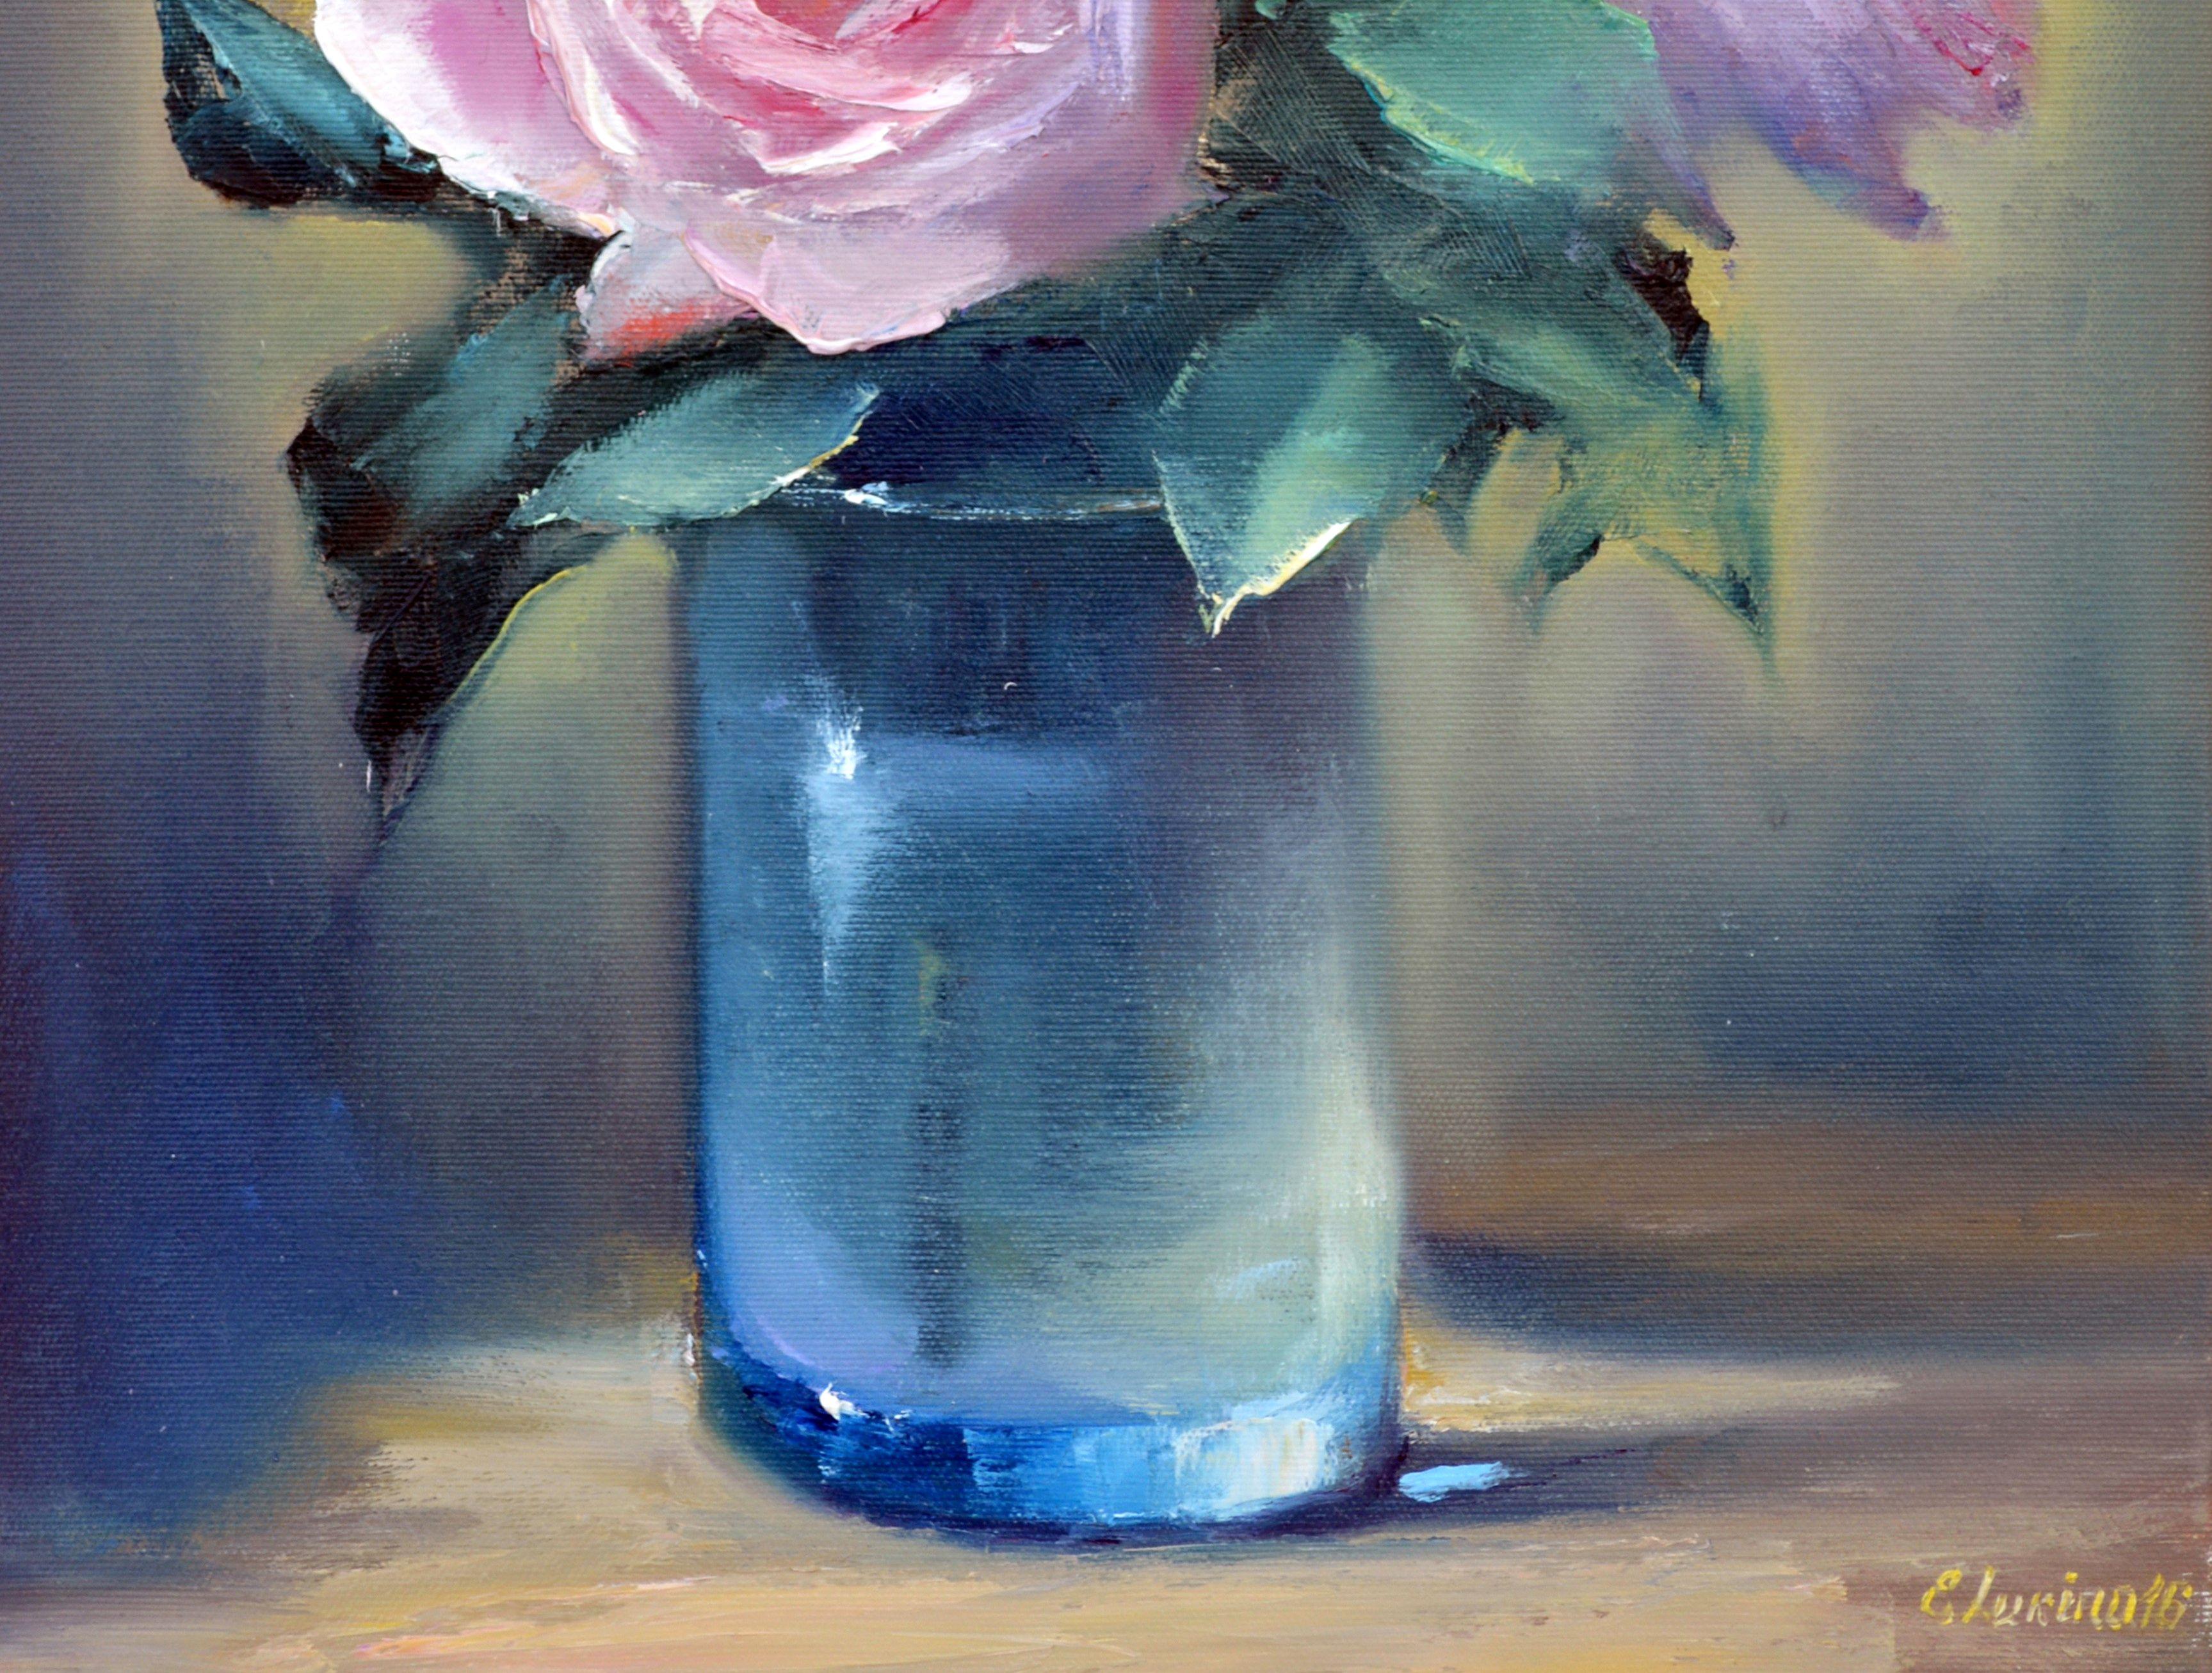 Winter roses 50X40 oil on canvas - Expressionist Painting by Elena Lukina